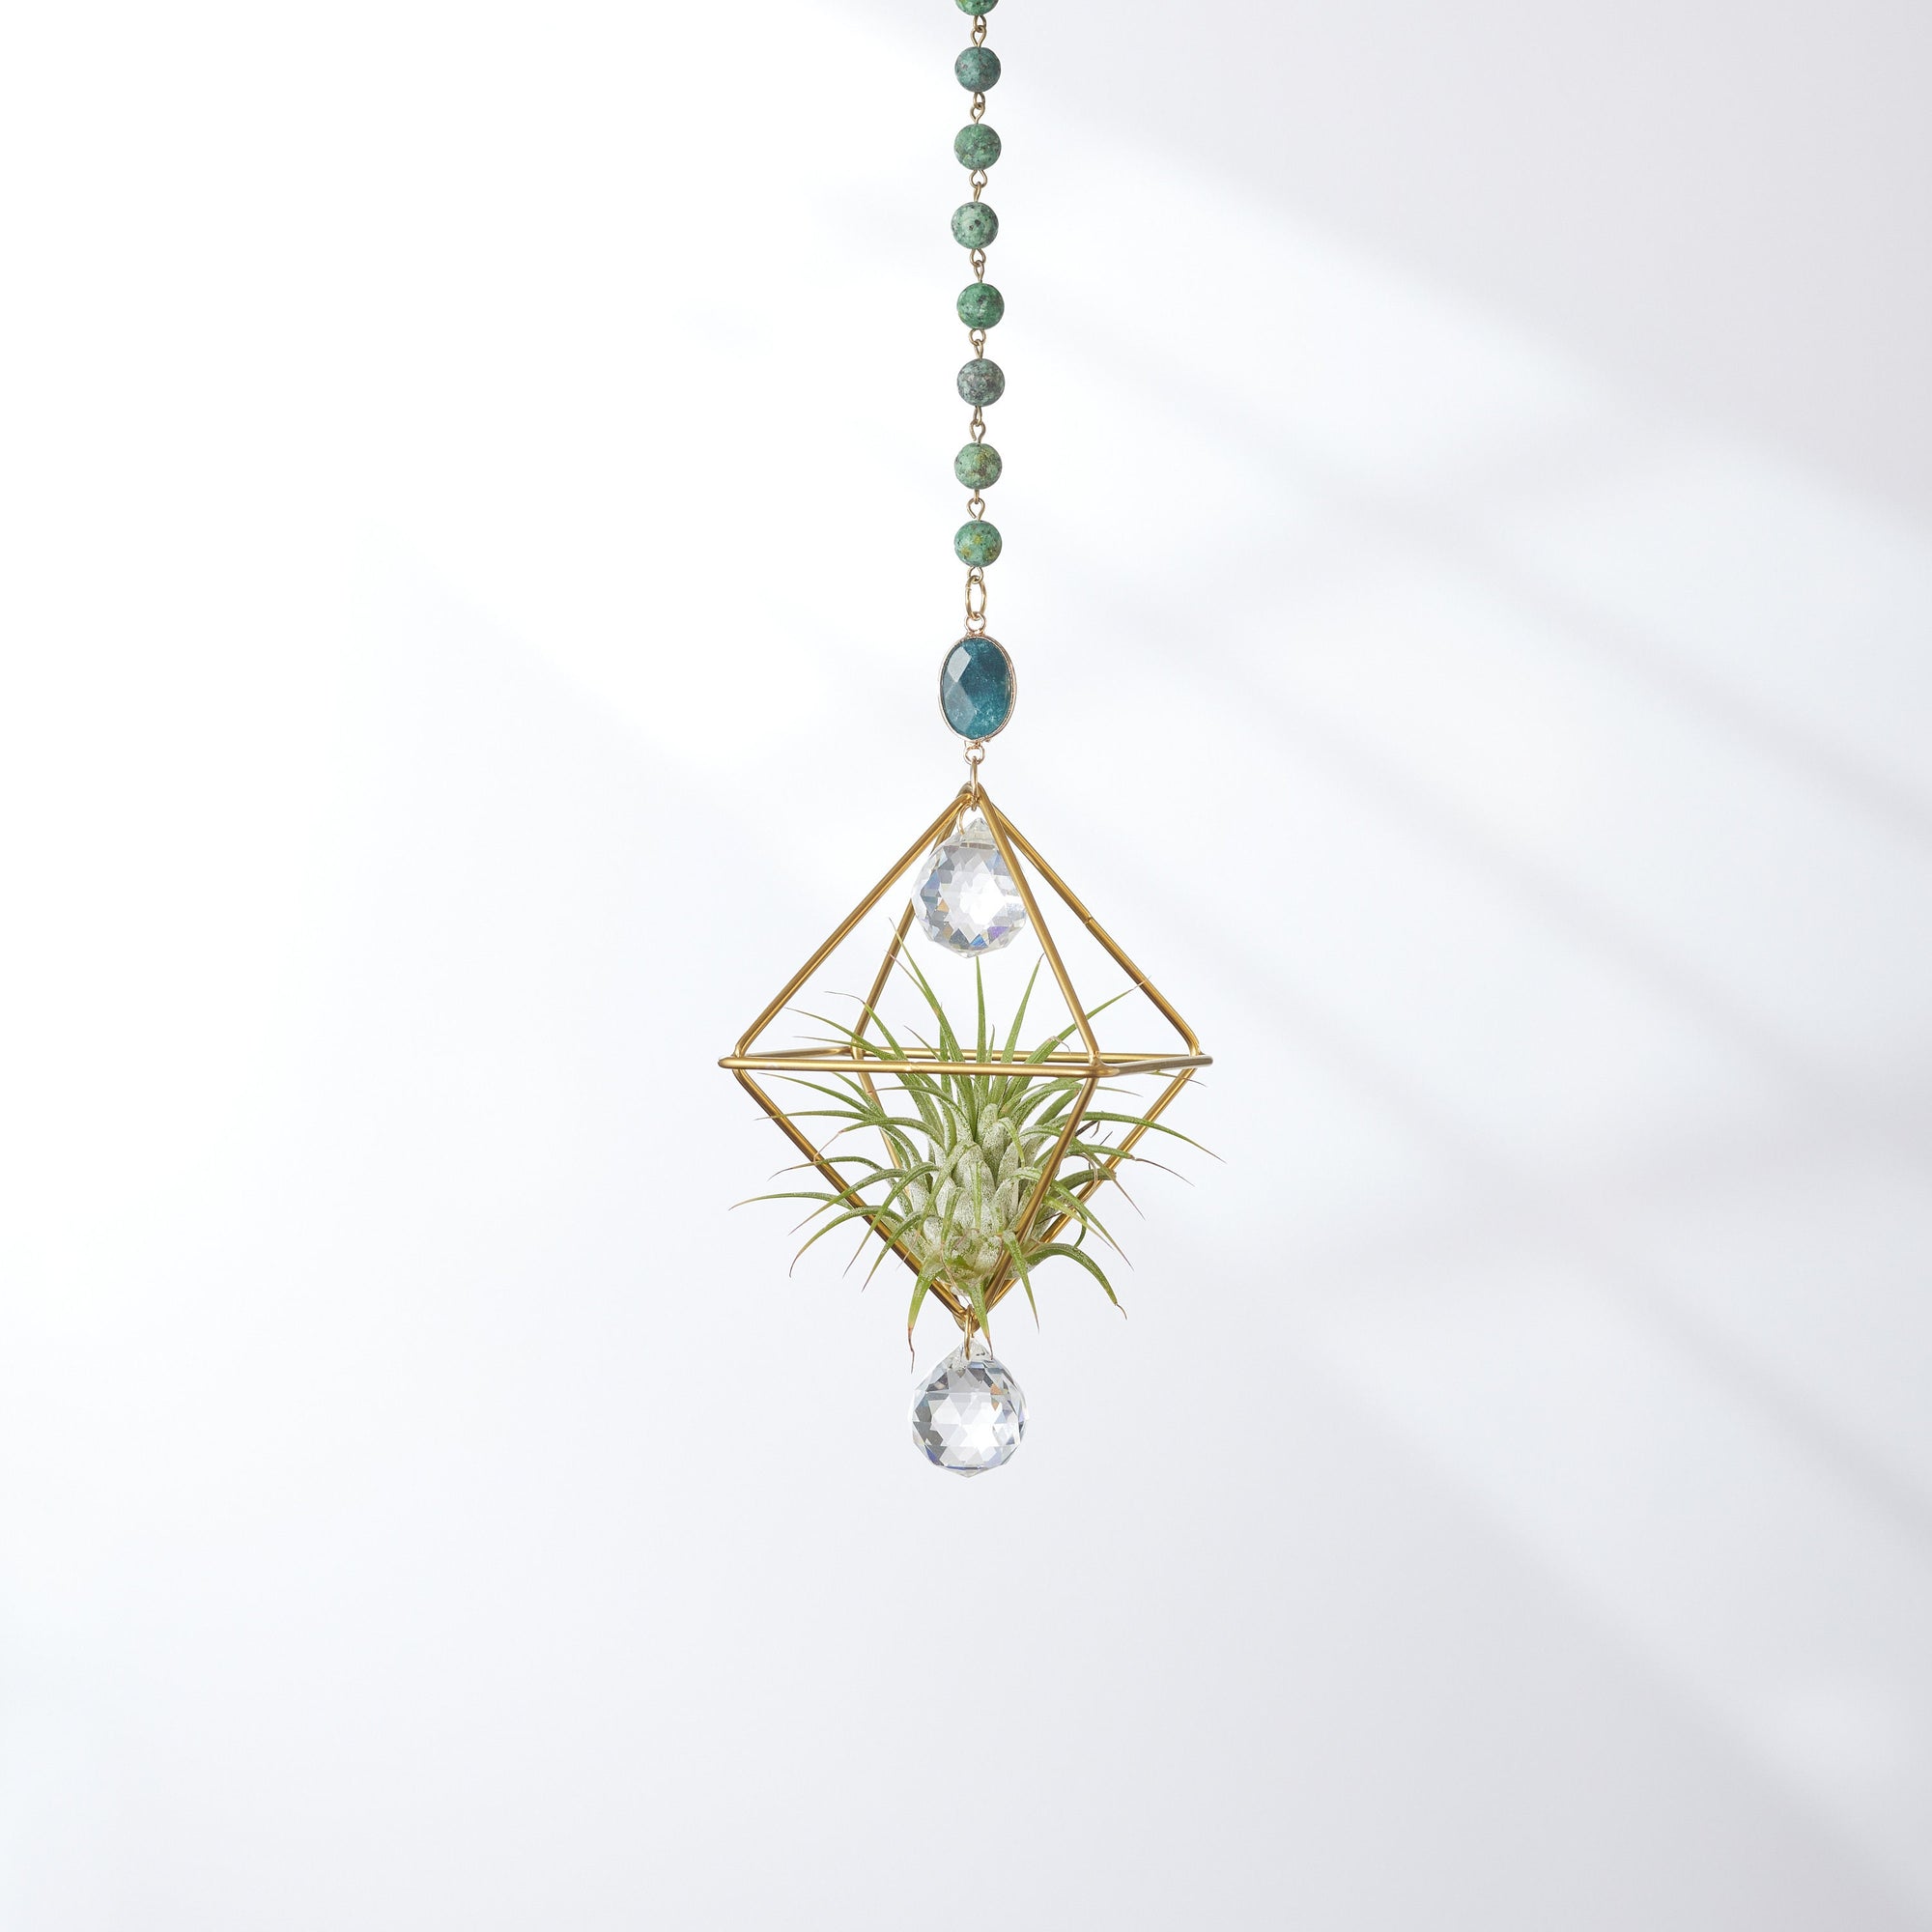 "Bijoux de Maison" Green African Turquiose Hanging Air Plant Holder with Prism